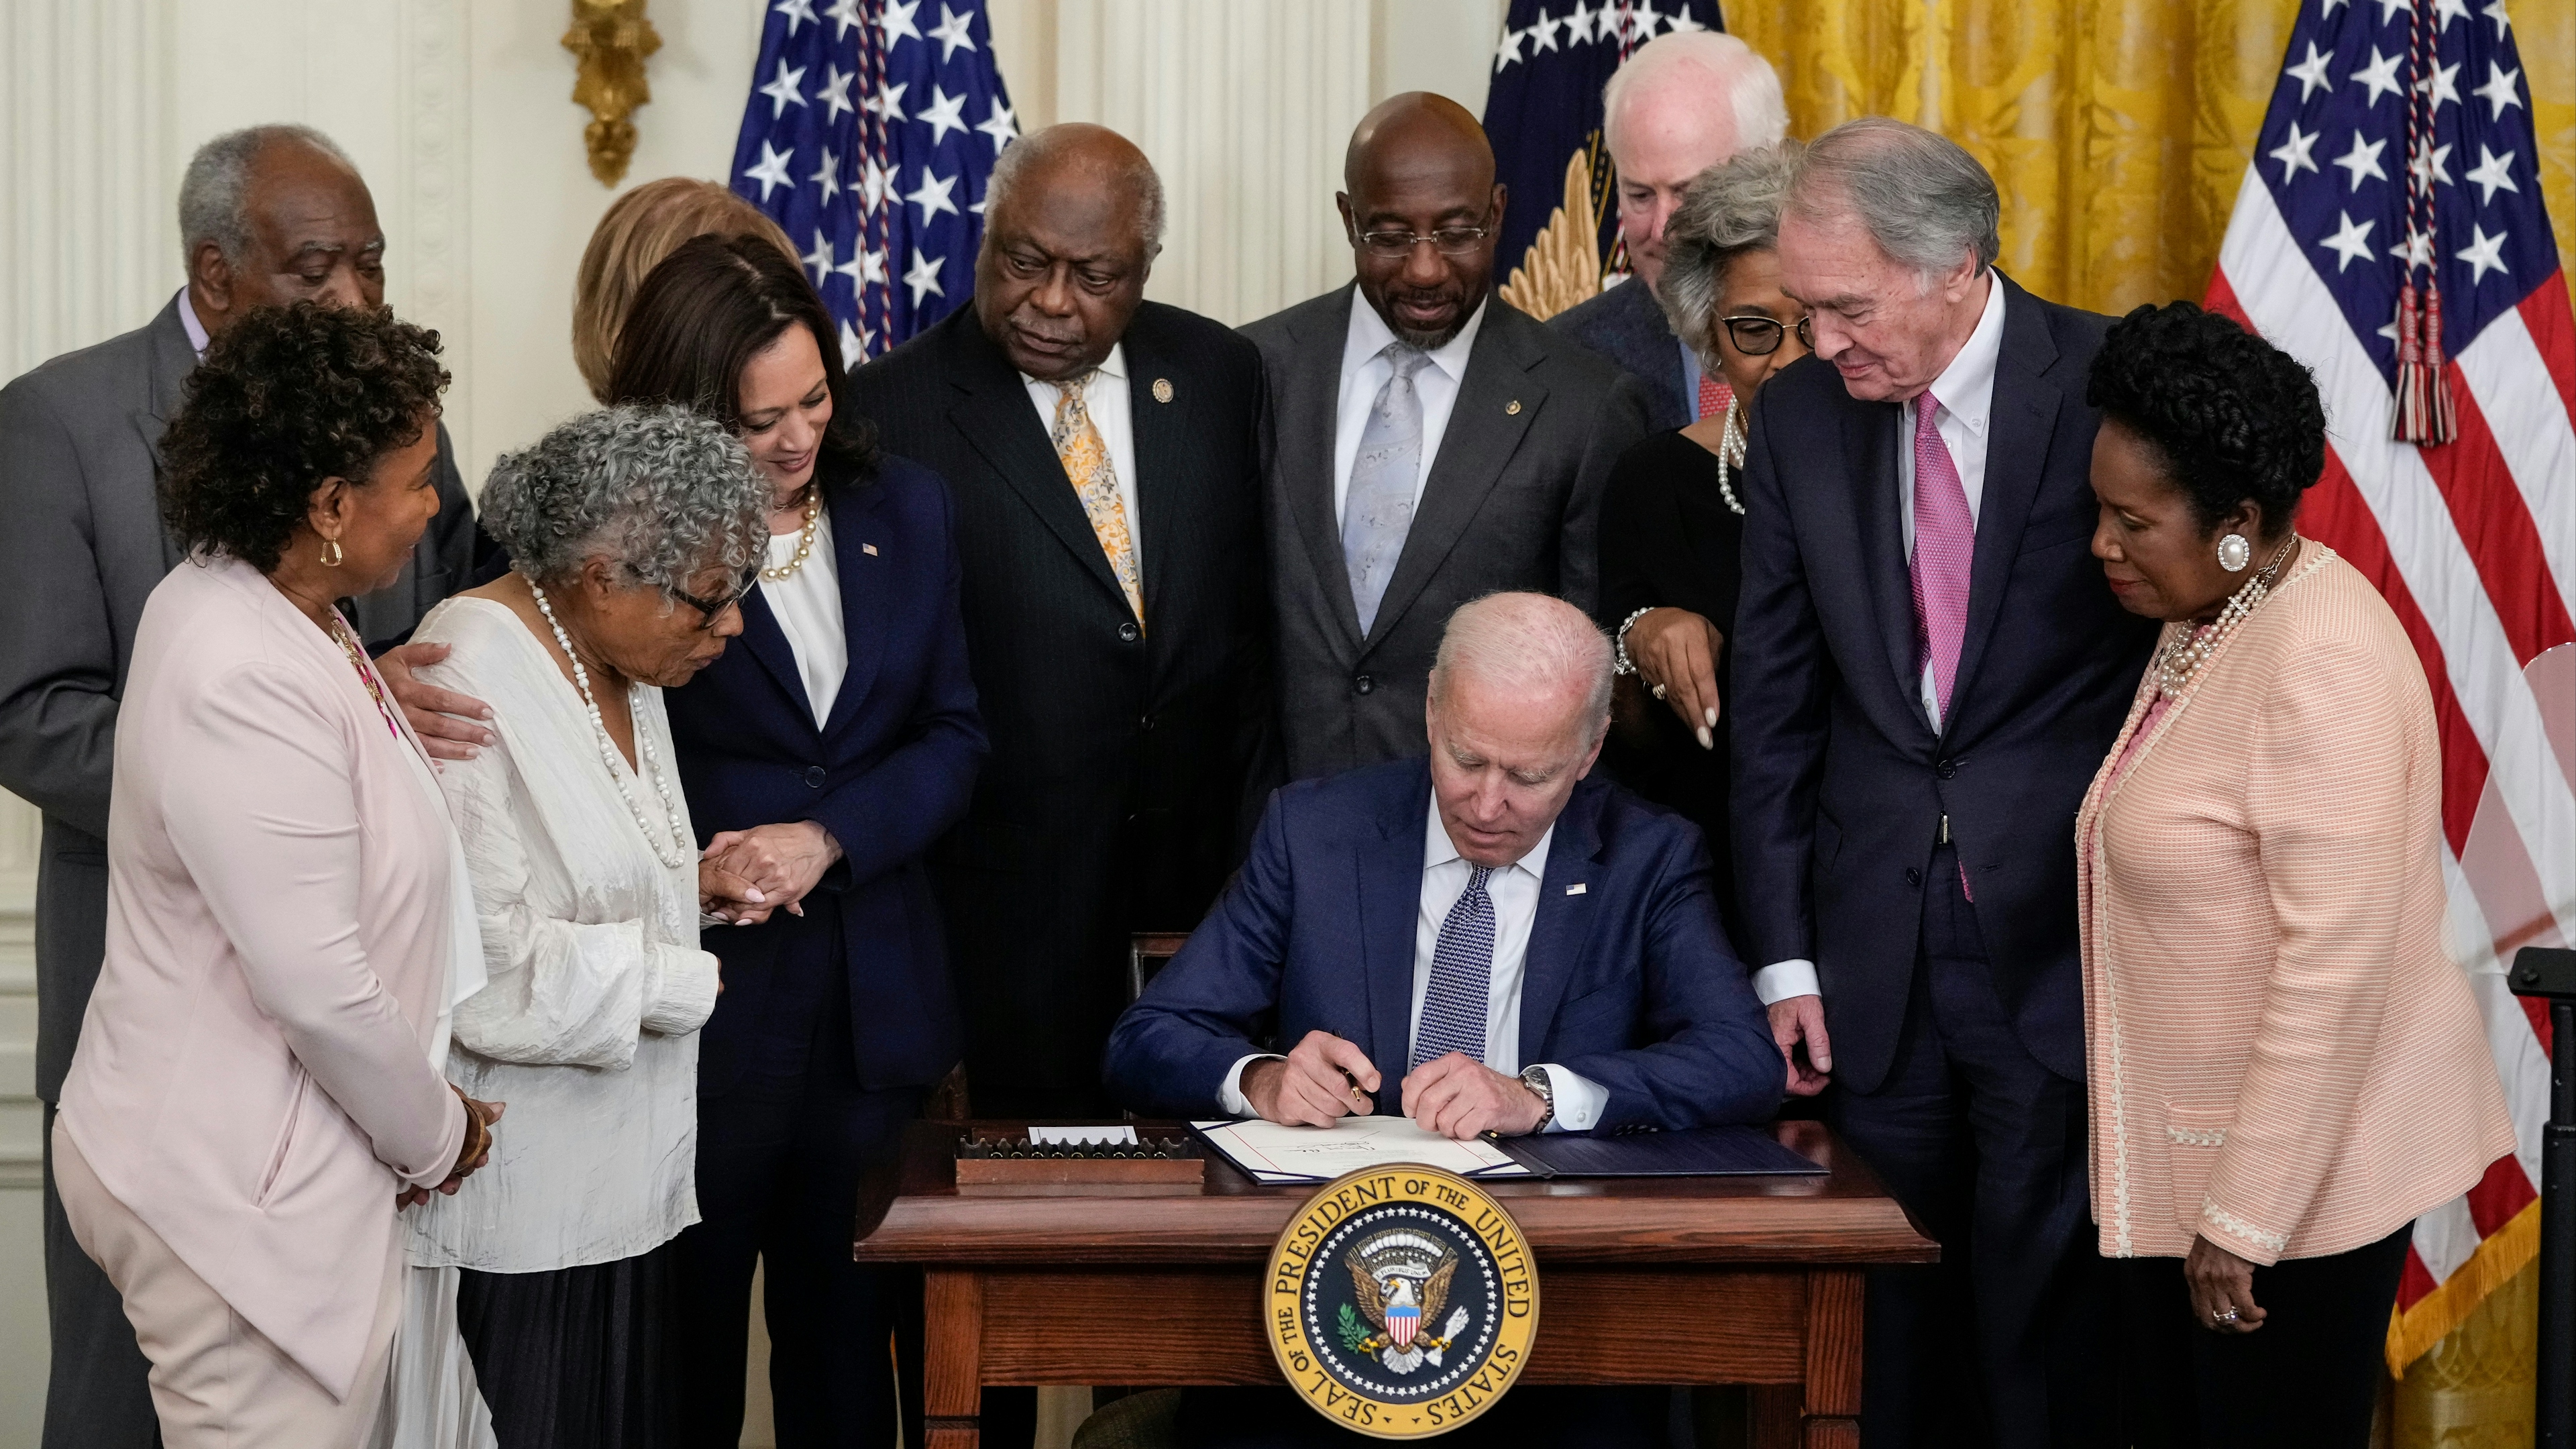  President Joe Biden signs the Juneteenth National Independence Day Act into law in the East Room of the White House 